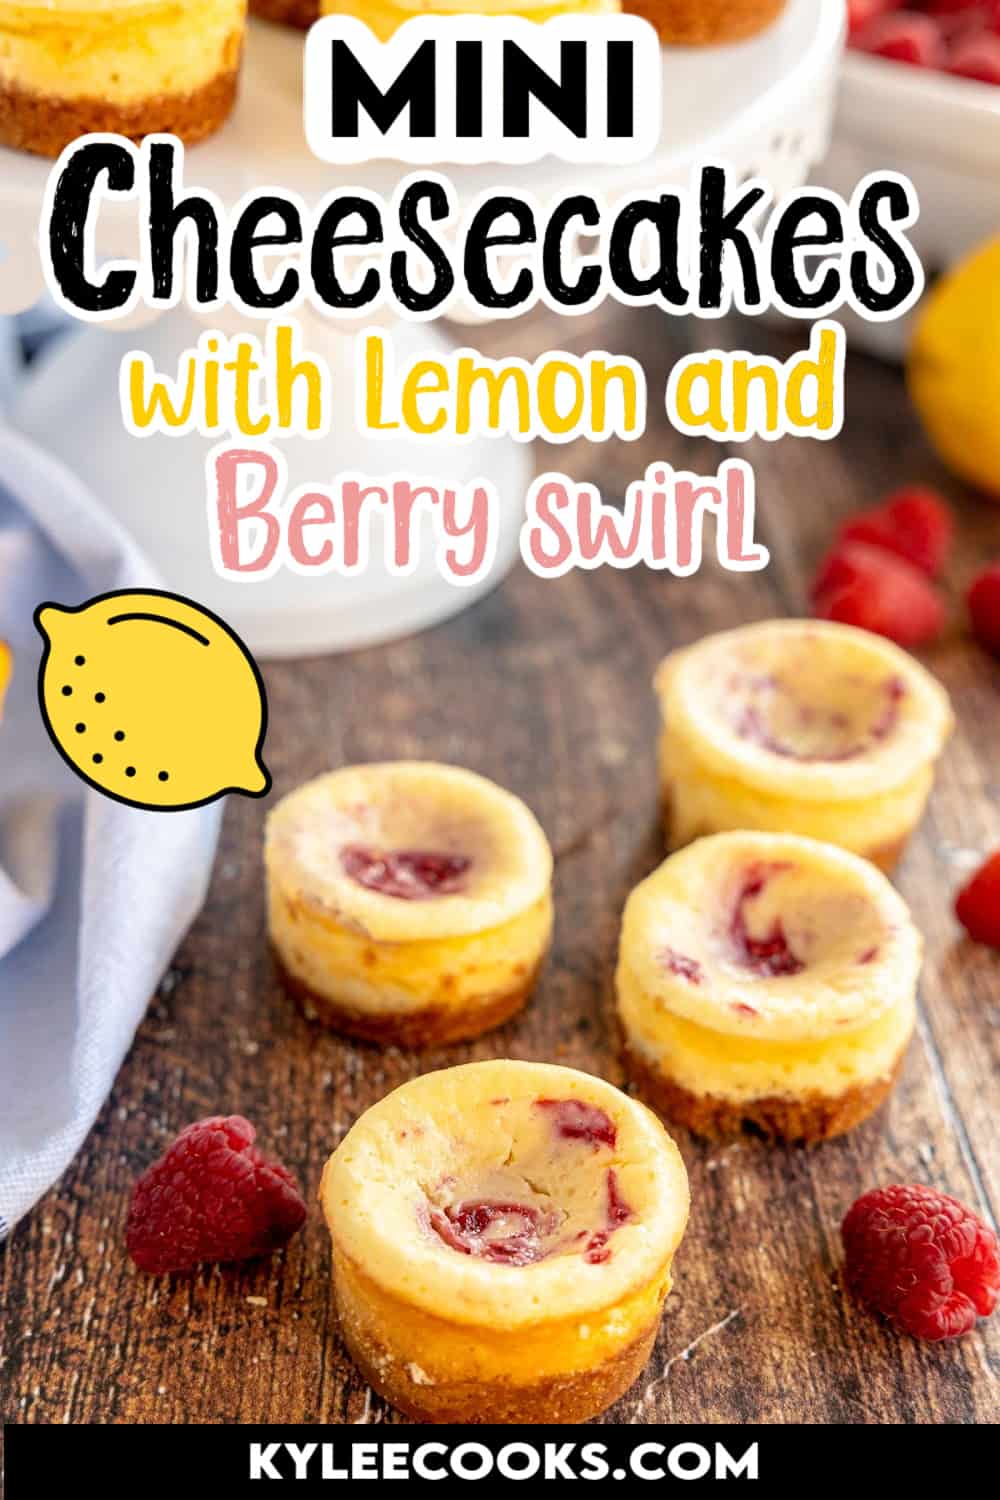 Mini lemon cheesecakes on a wooden board with recipe name and ingredients overlaid in text.